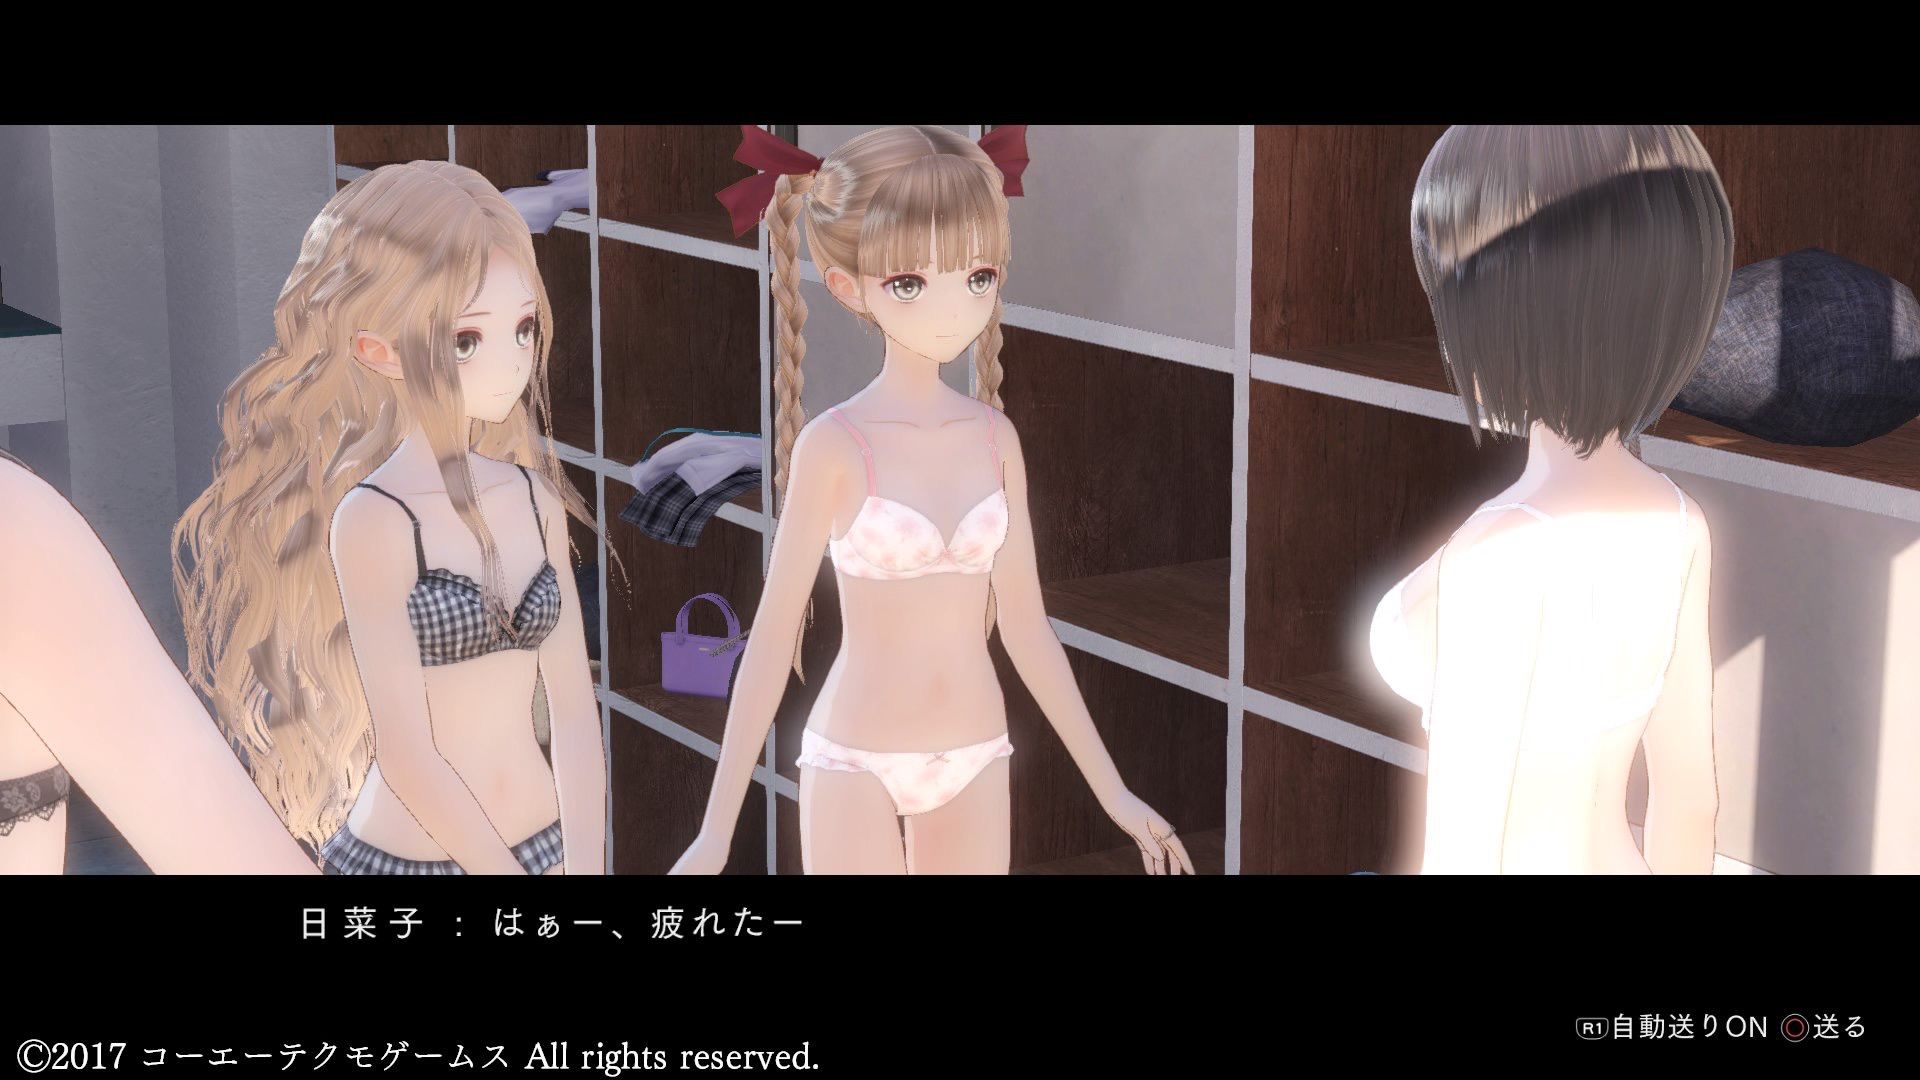 [image] Game H with a view of the underwear passes; ワロタ wwwwwwwww 2